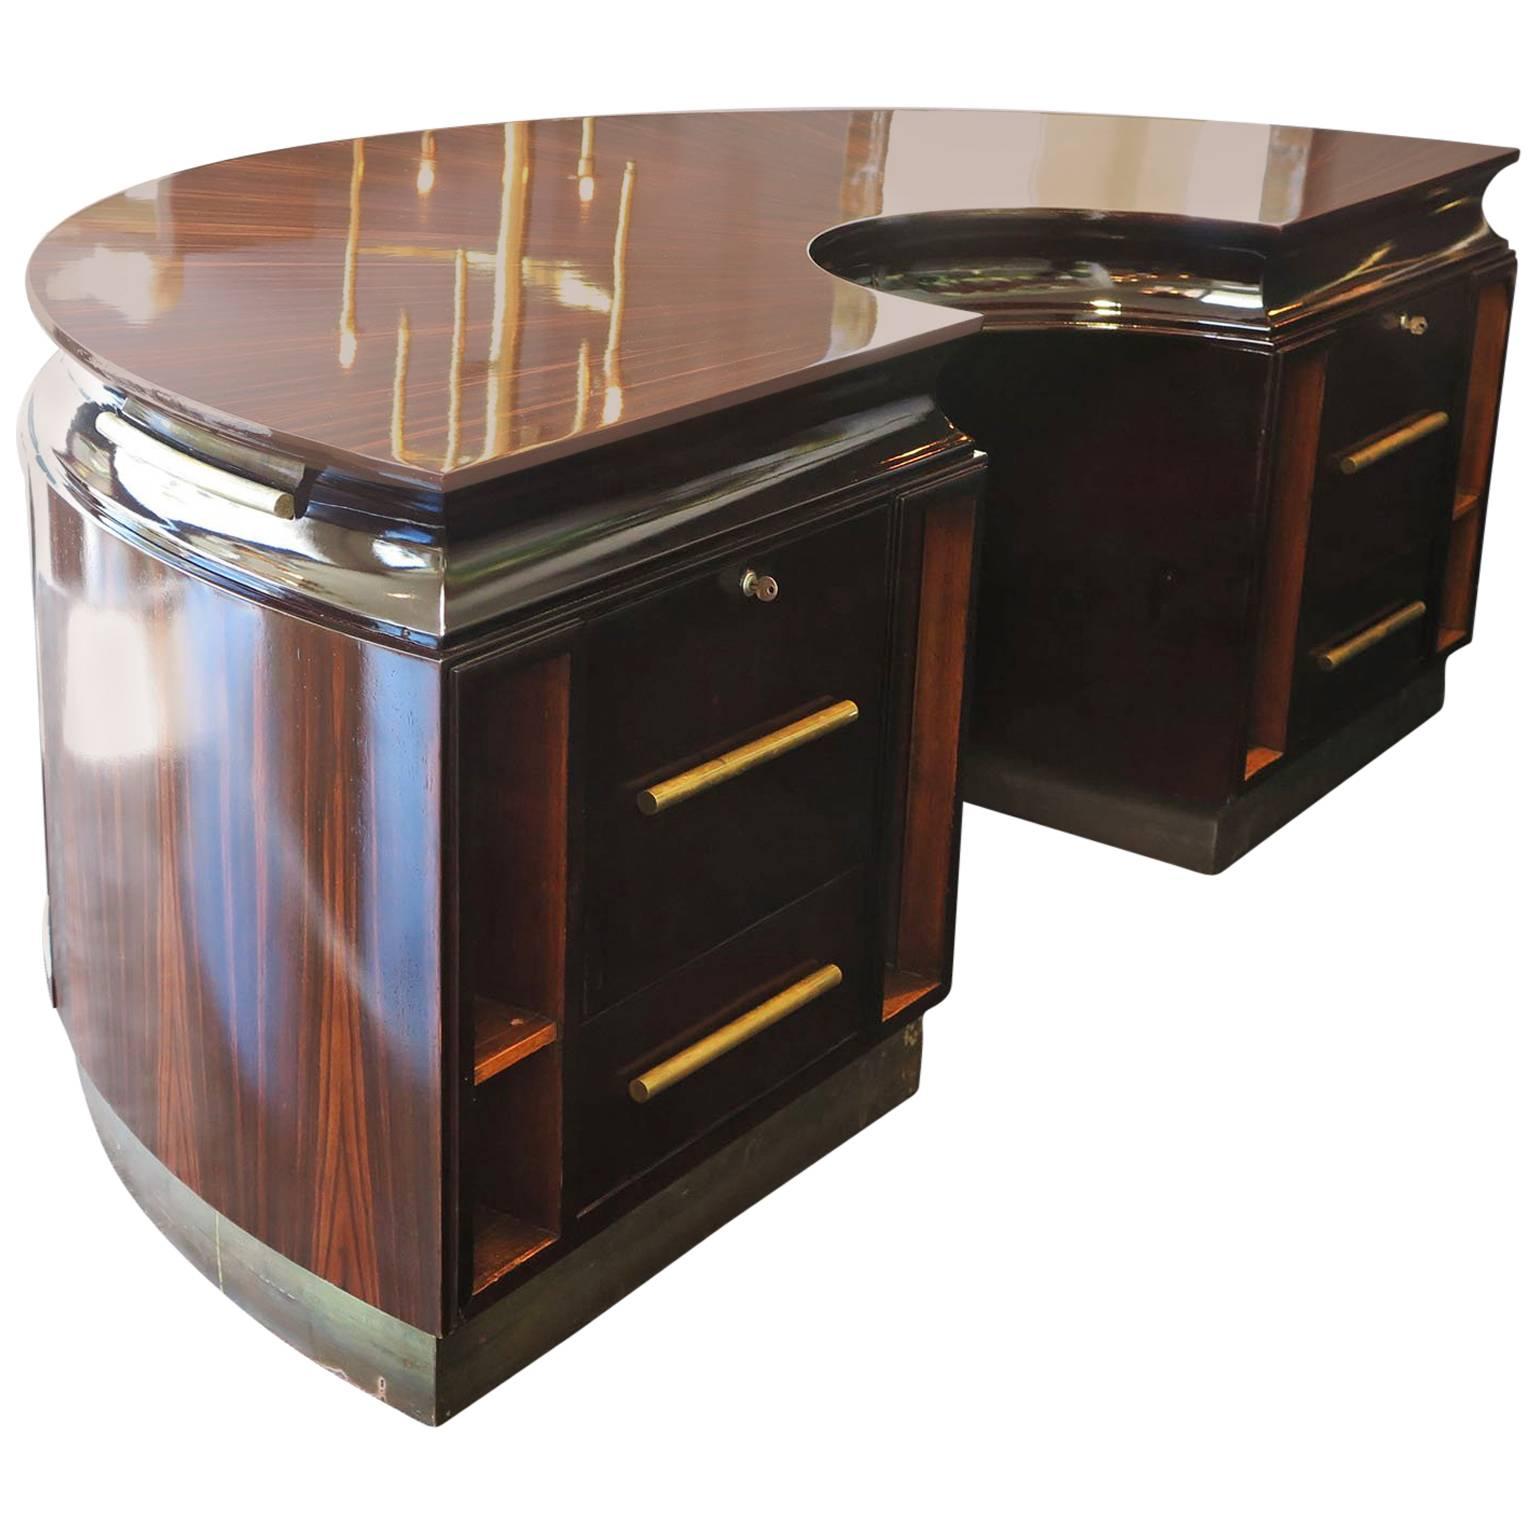 Grand demilune executive desk in Macassar ebony with a starburst design on top. Antique brass base and brass pulls add nice details to this desk. Five front brass pulls open to additional shelving.
Four mahogany niches in front offer space for